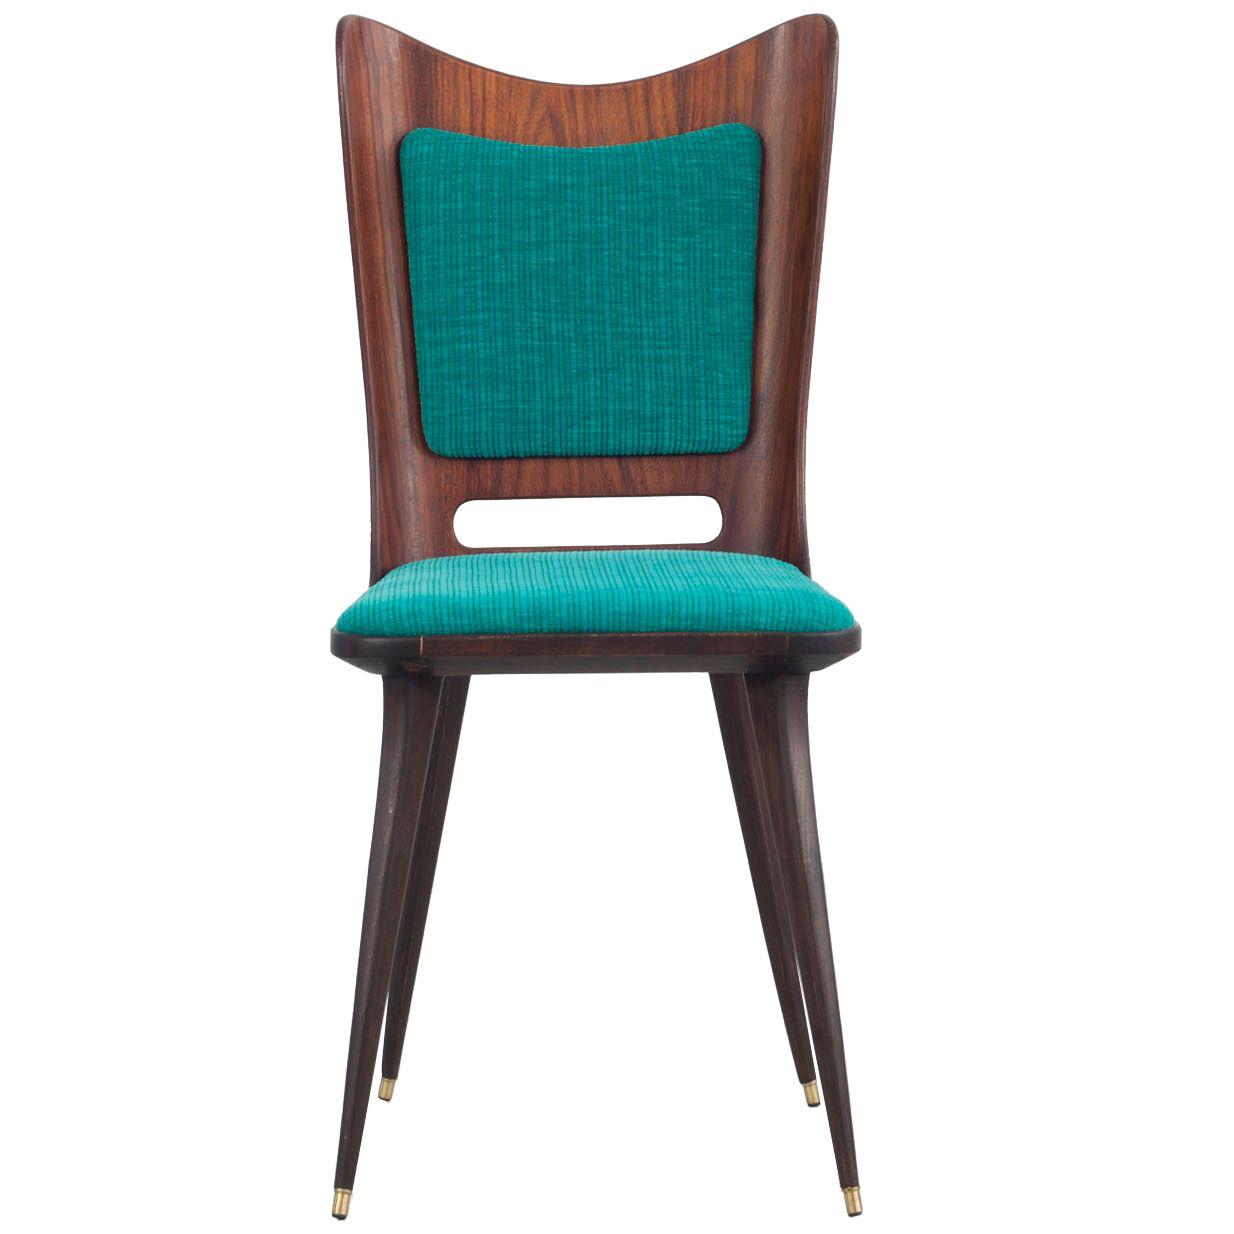 Set of Six Wooden Dining Chairs with Green Upholstery, 1950s